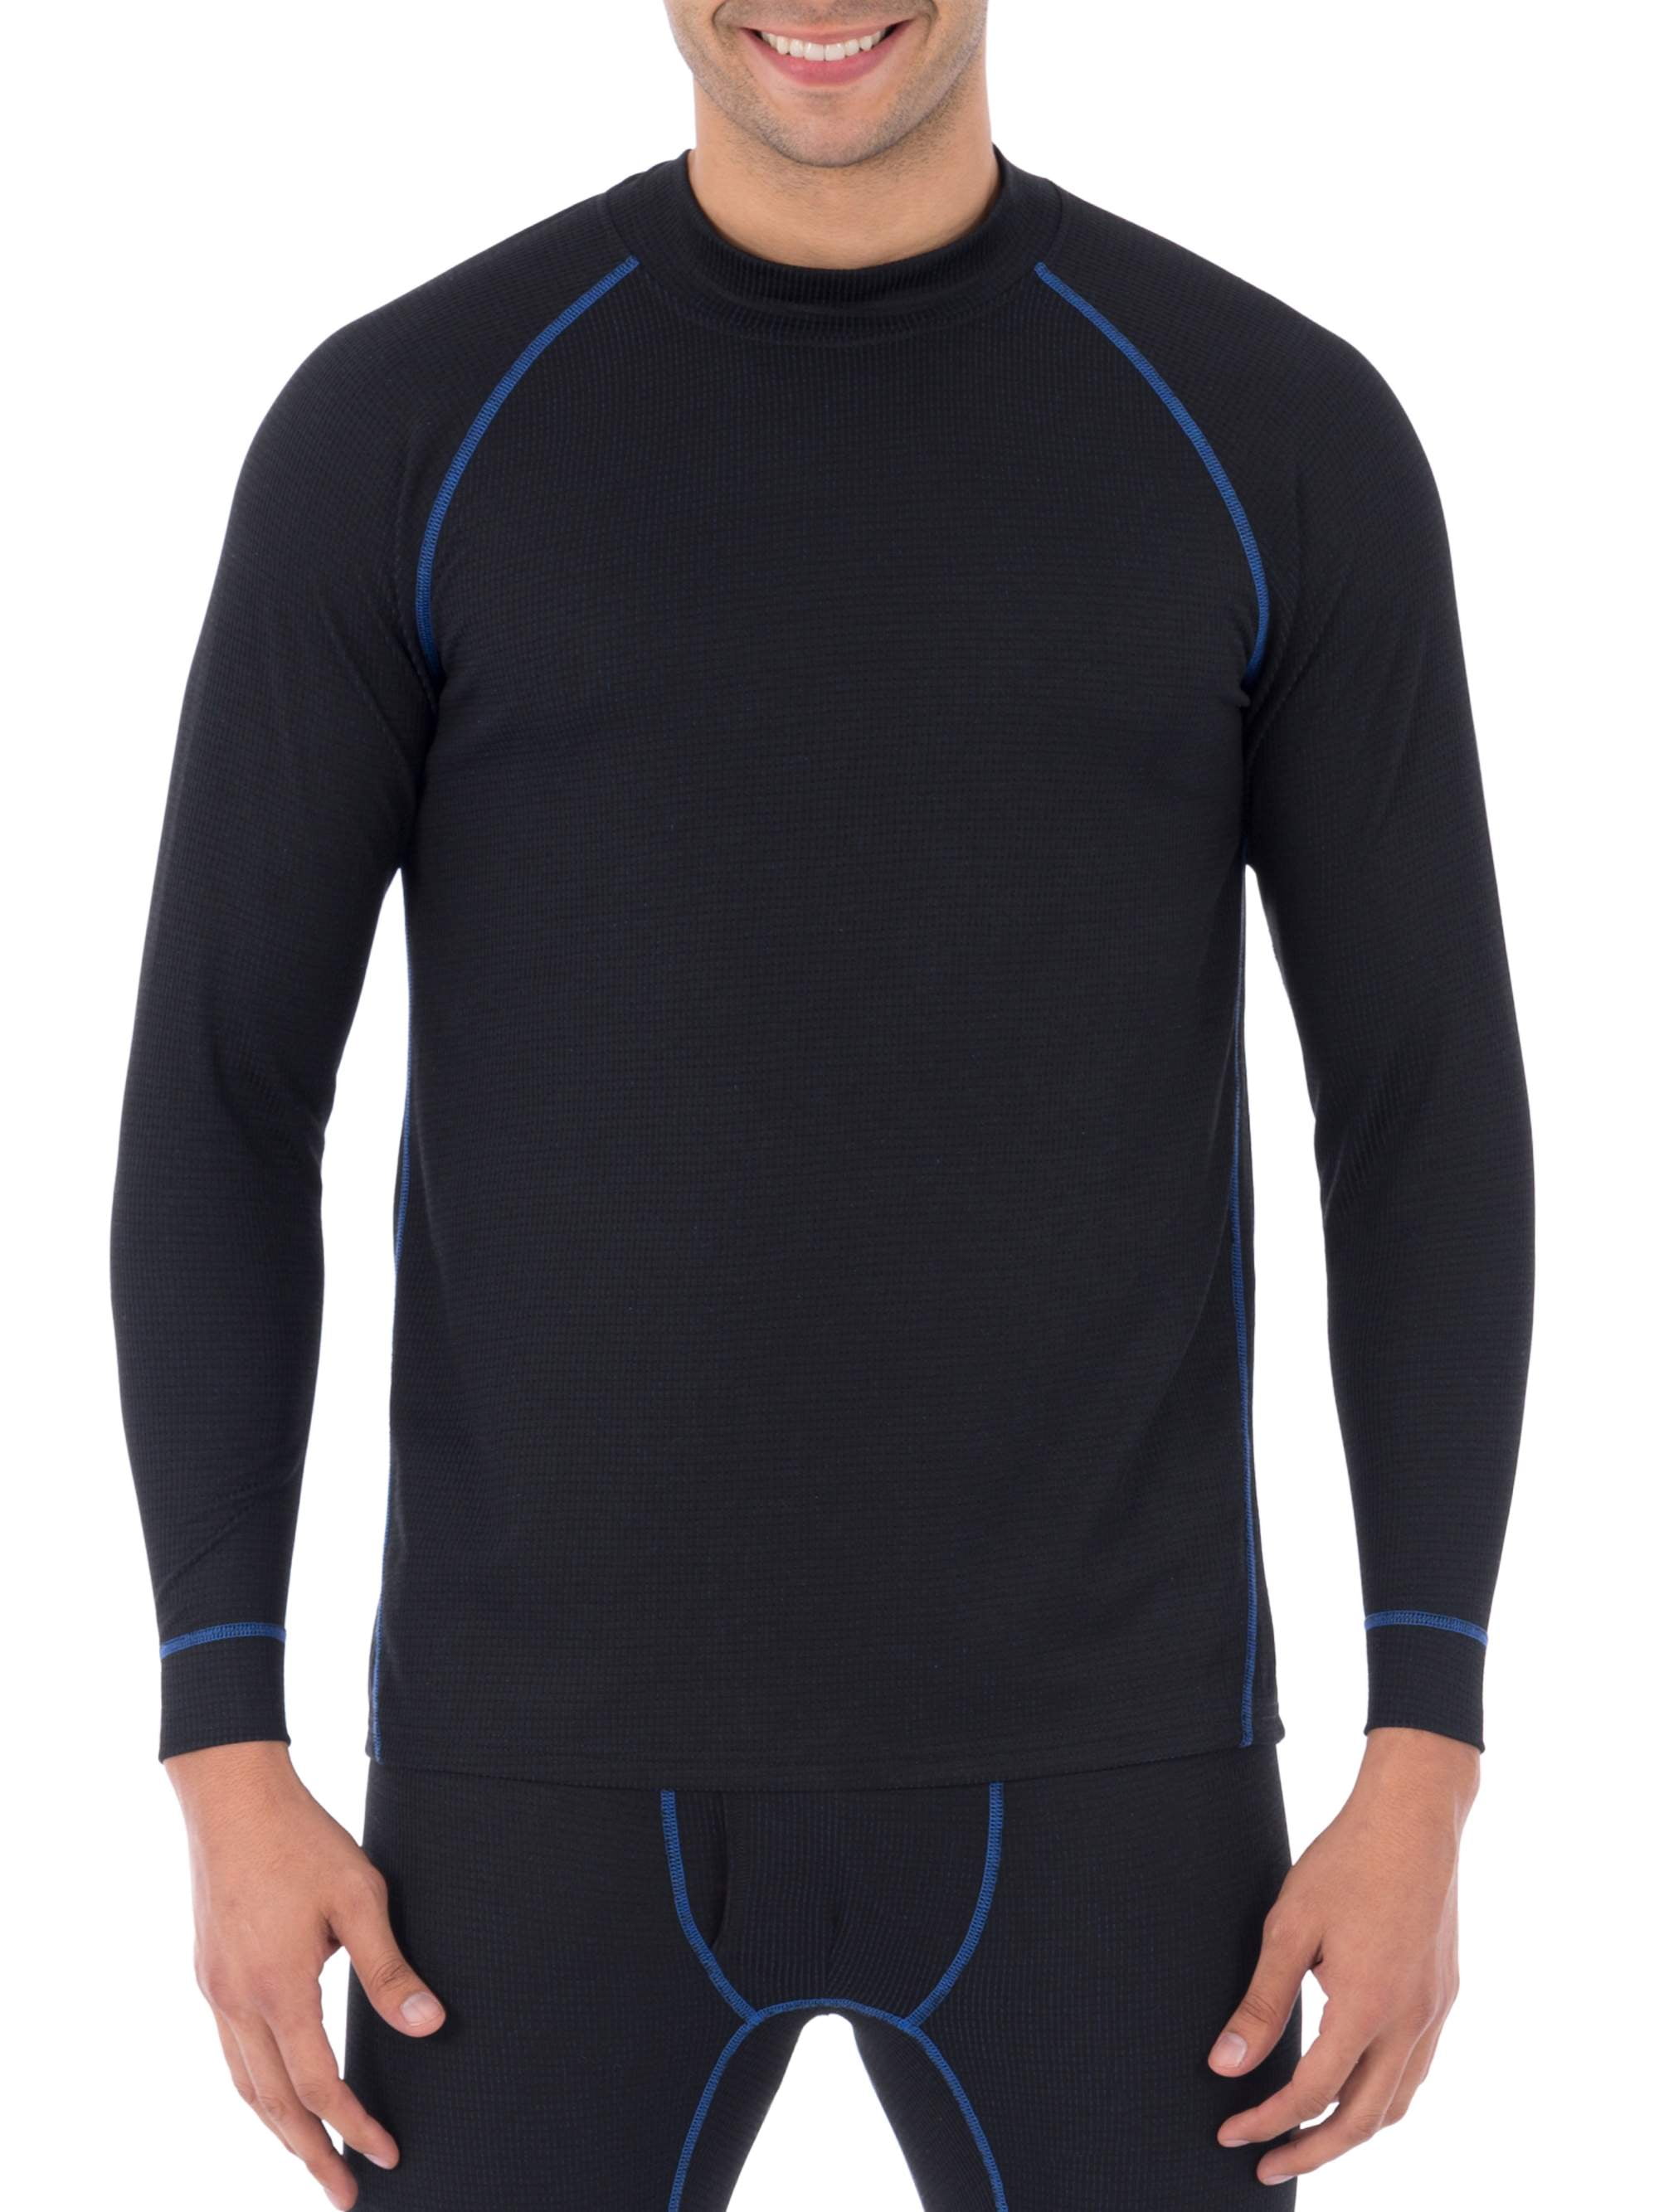 Russell Therma Force Boys Black Performance Base Layer Thermal Set Large 10/12 